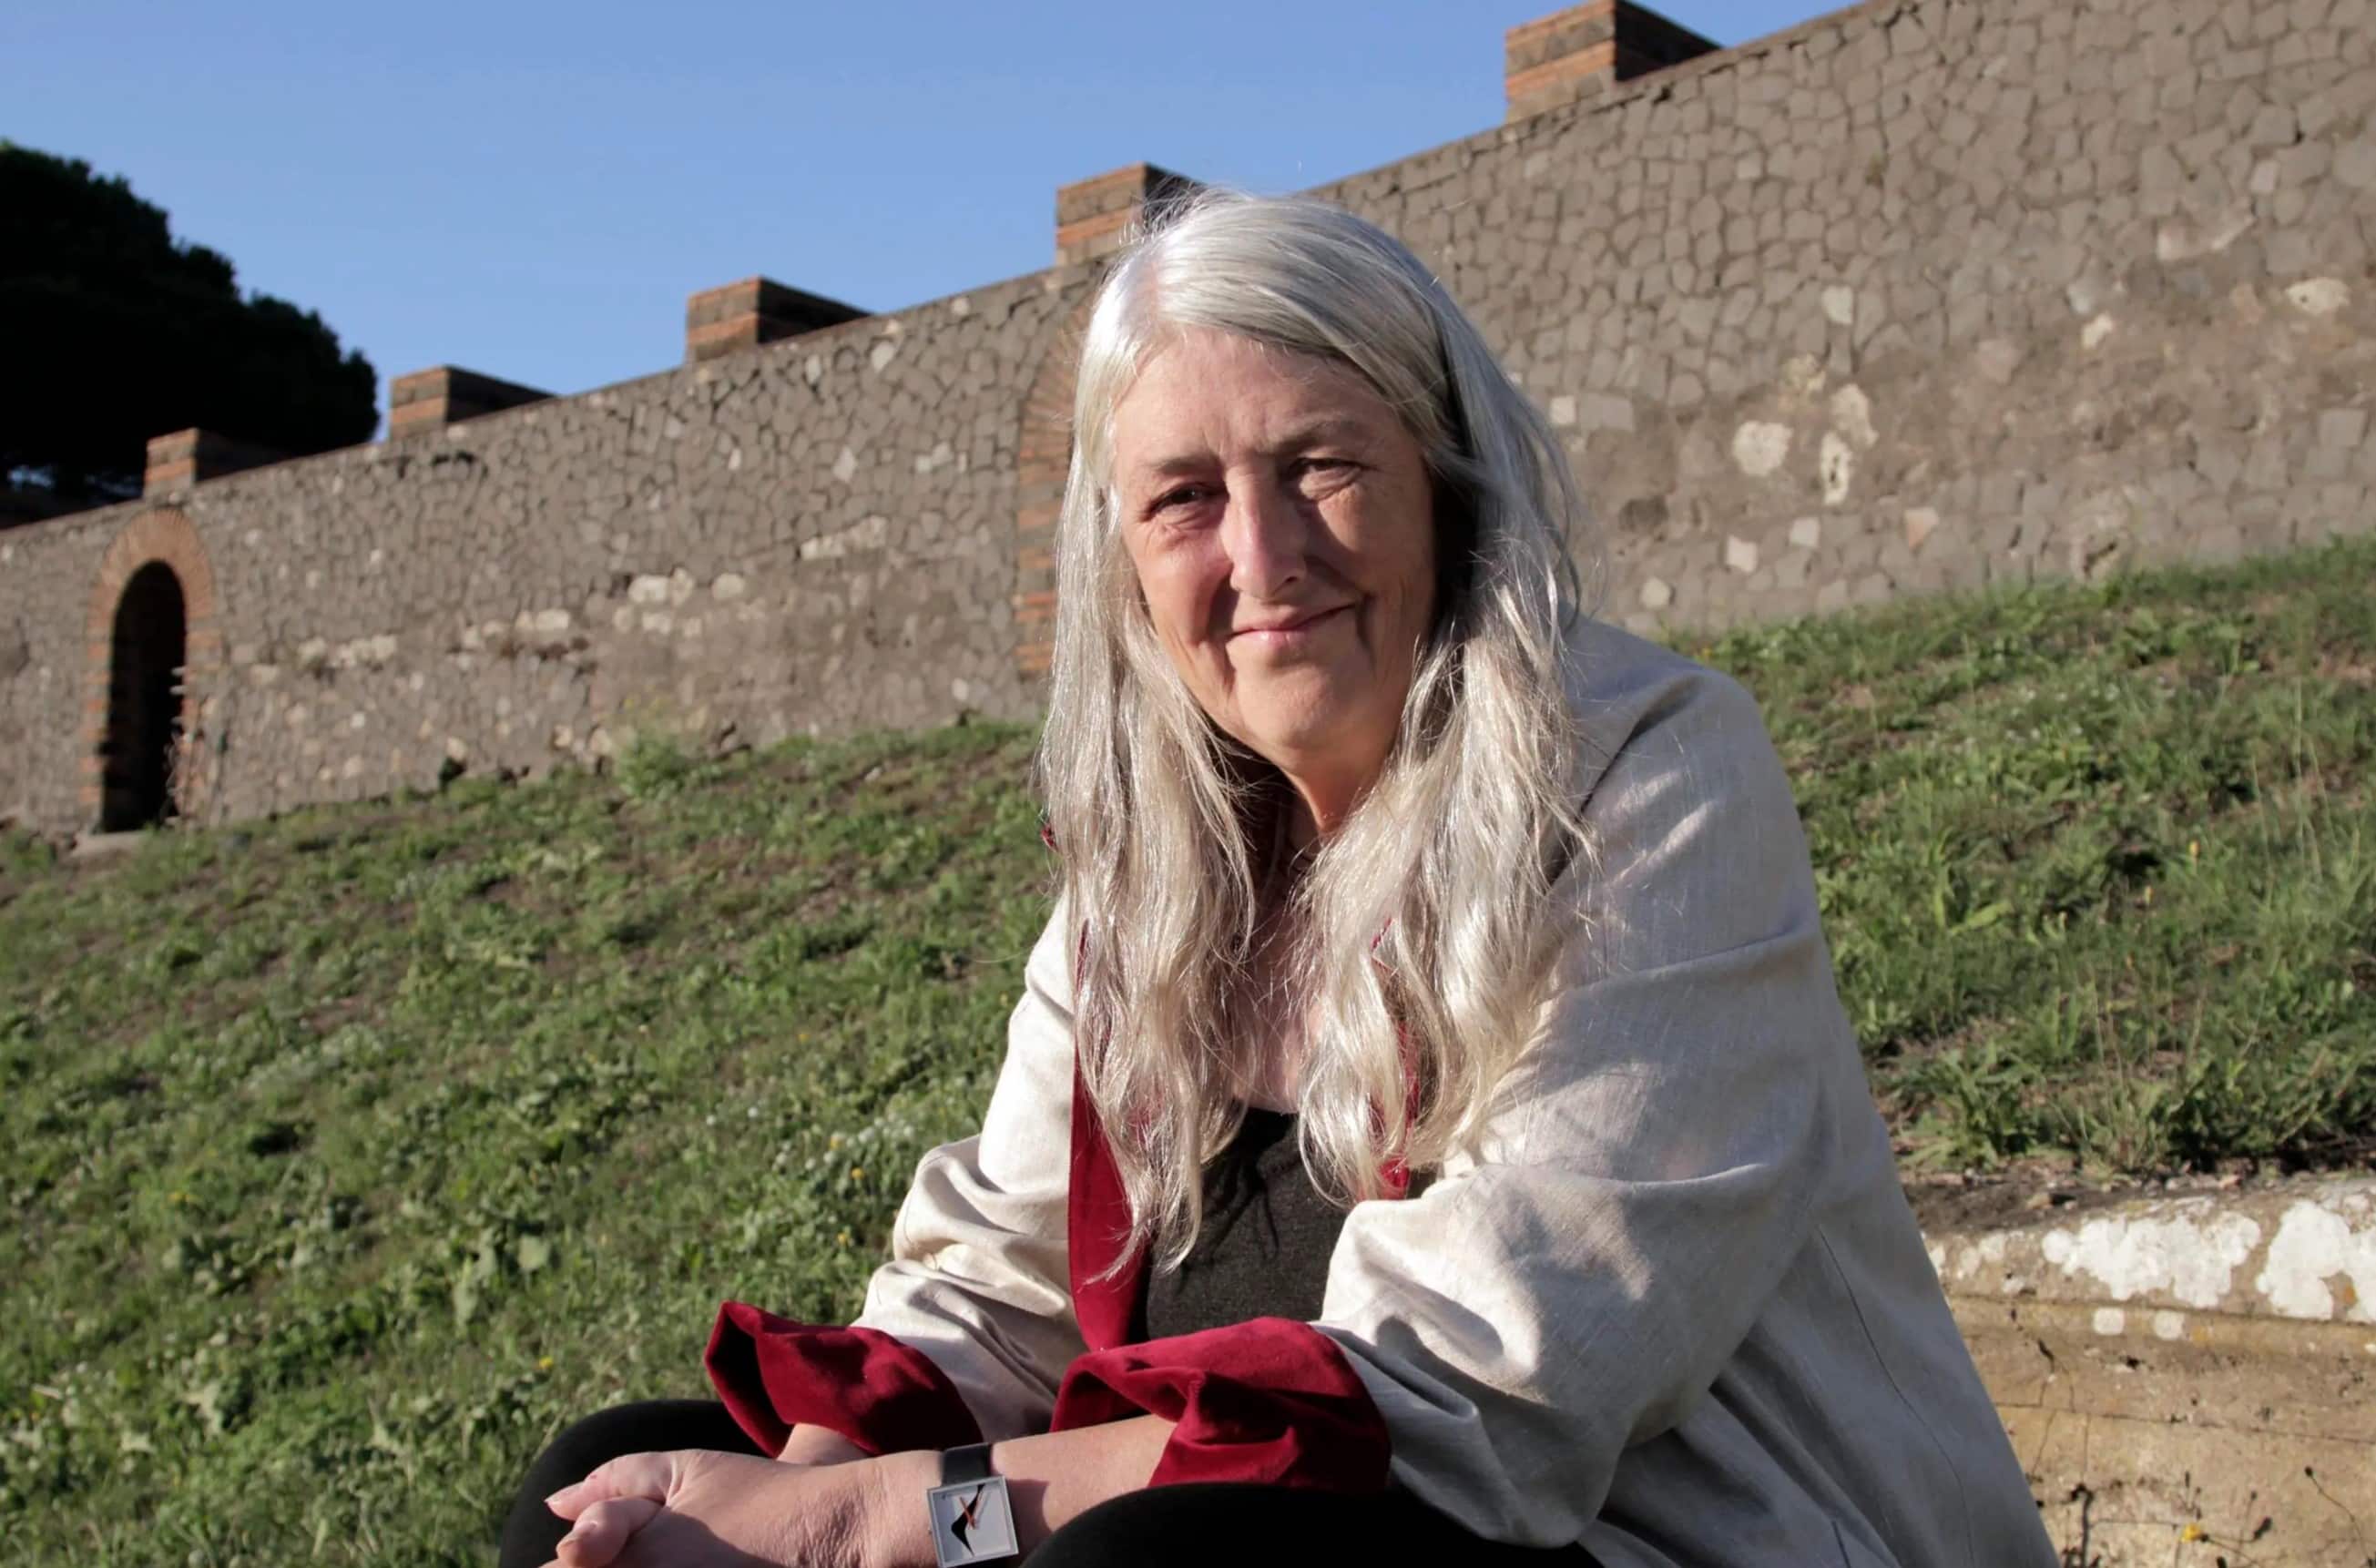 9 Extraordinary Facts About Mary Beard - Facts.net